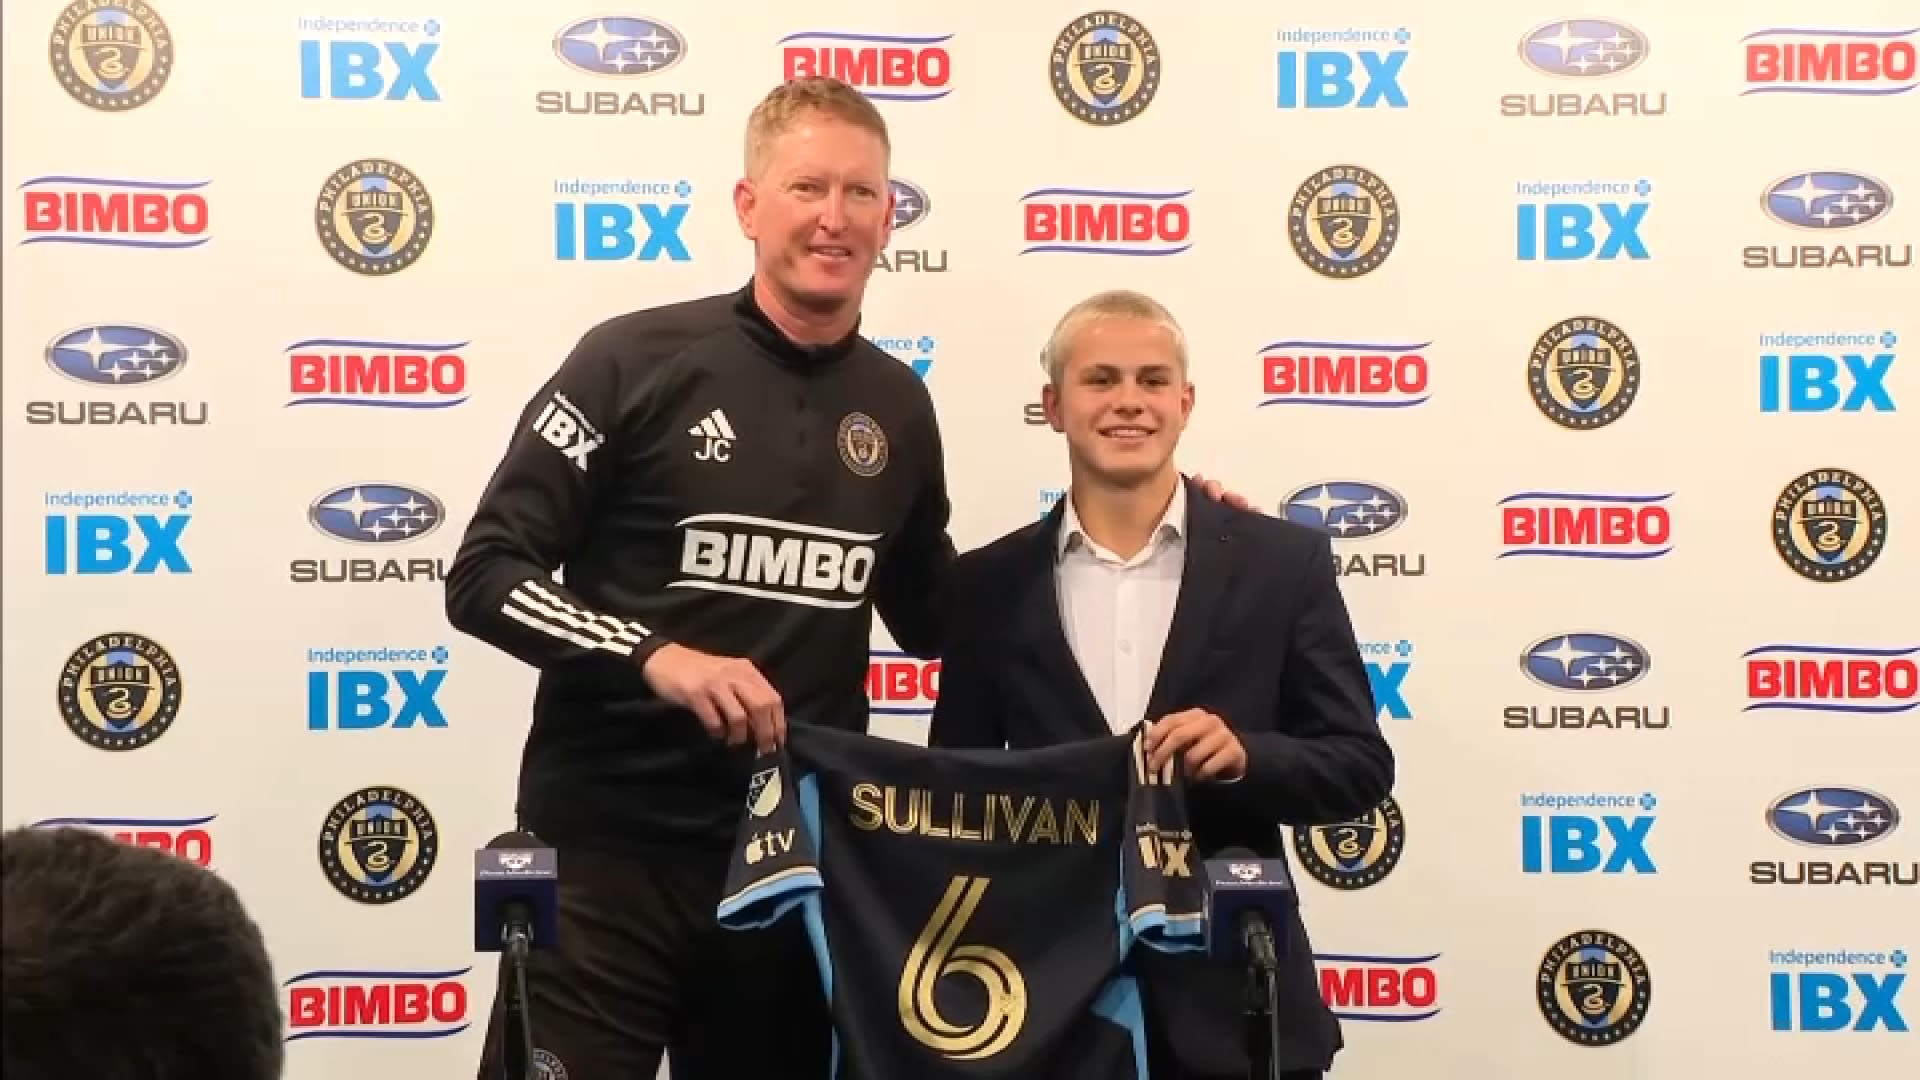 14-year-old Cavan Sullivan to dress for Union's next game